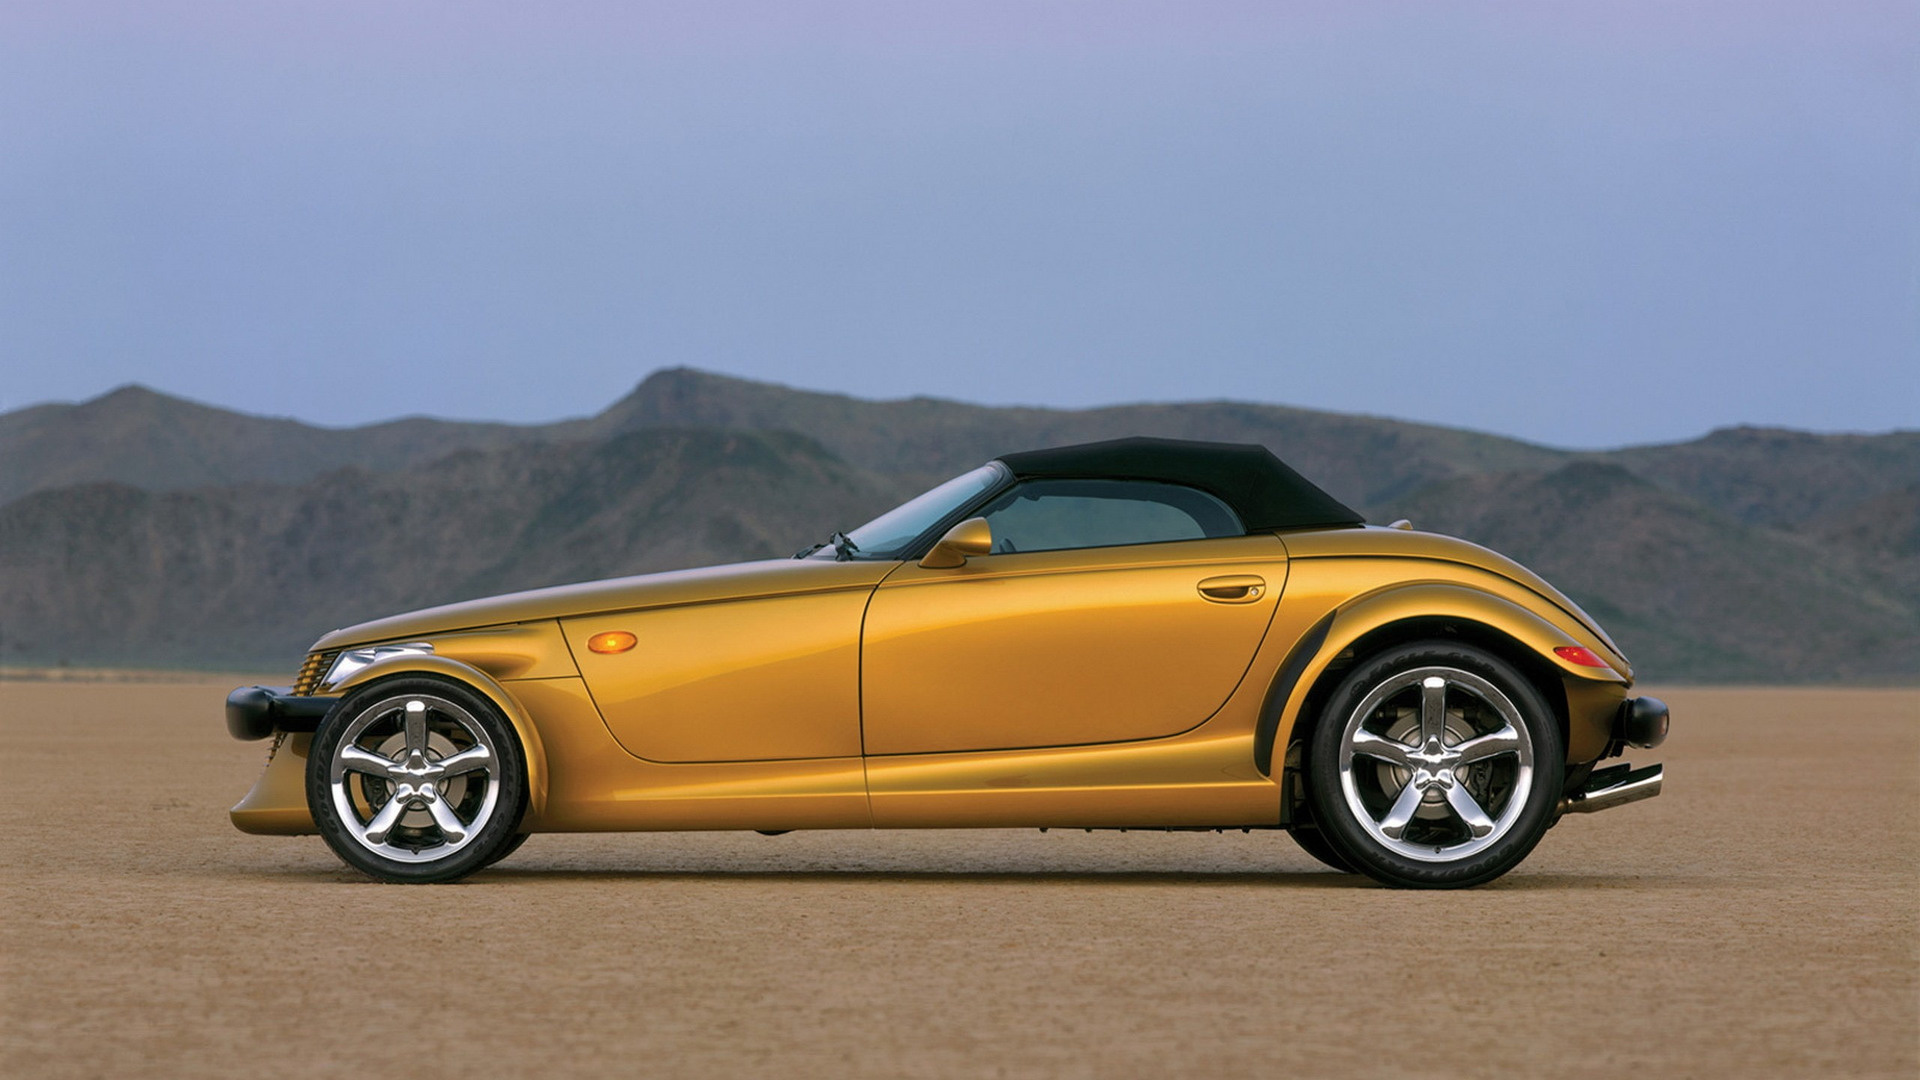 Plymouth Prowler, Iconic design, Futuristic concept, Unique and head-turning, 1920x1080 Full HD Desktop